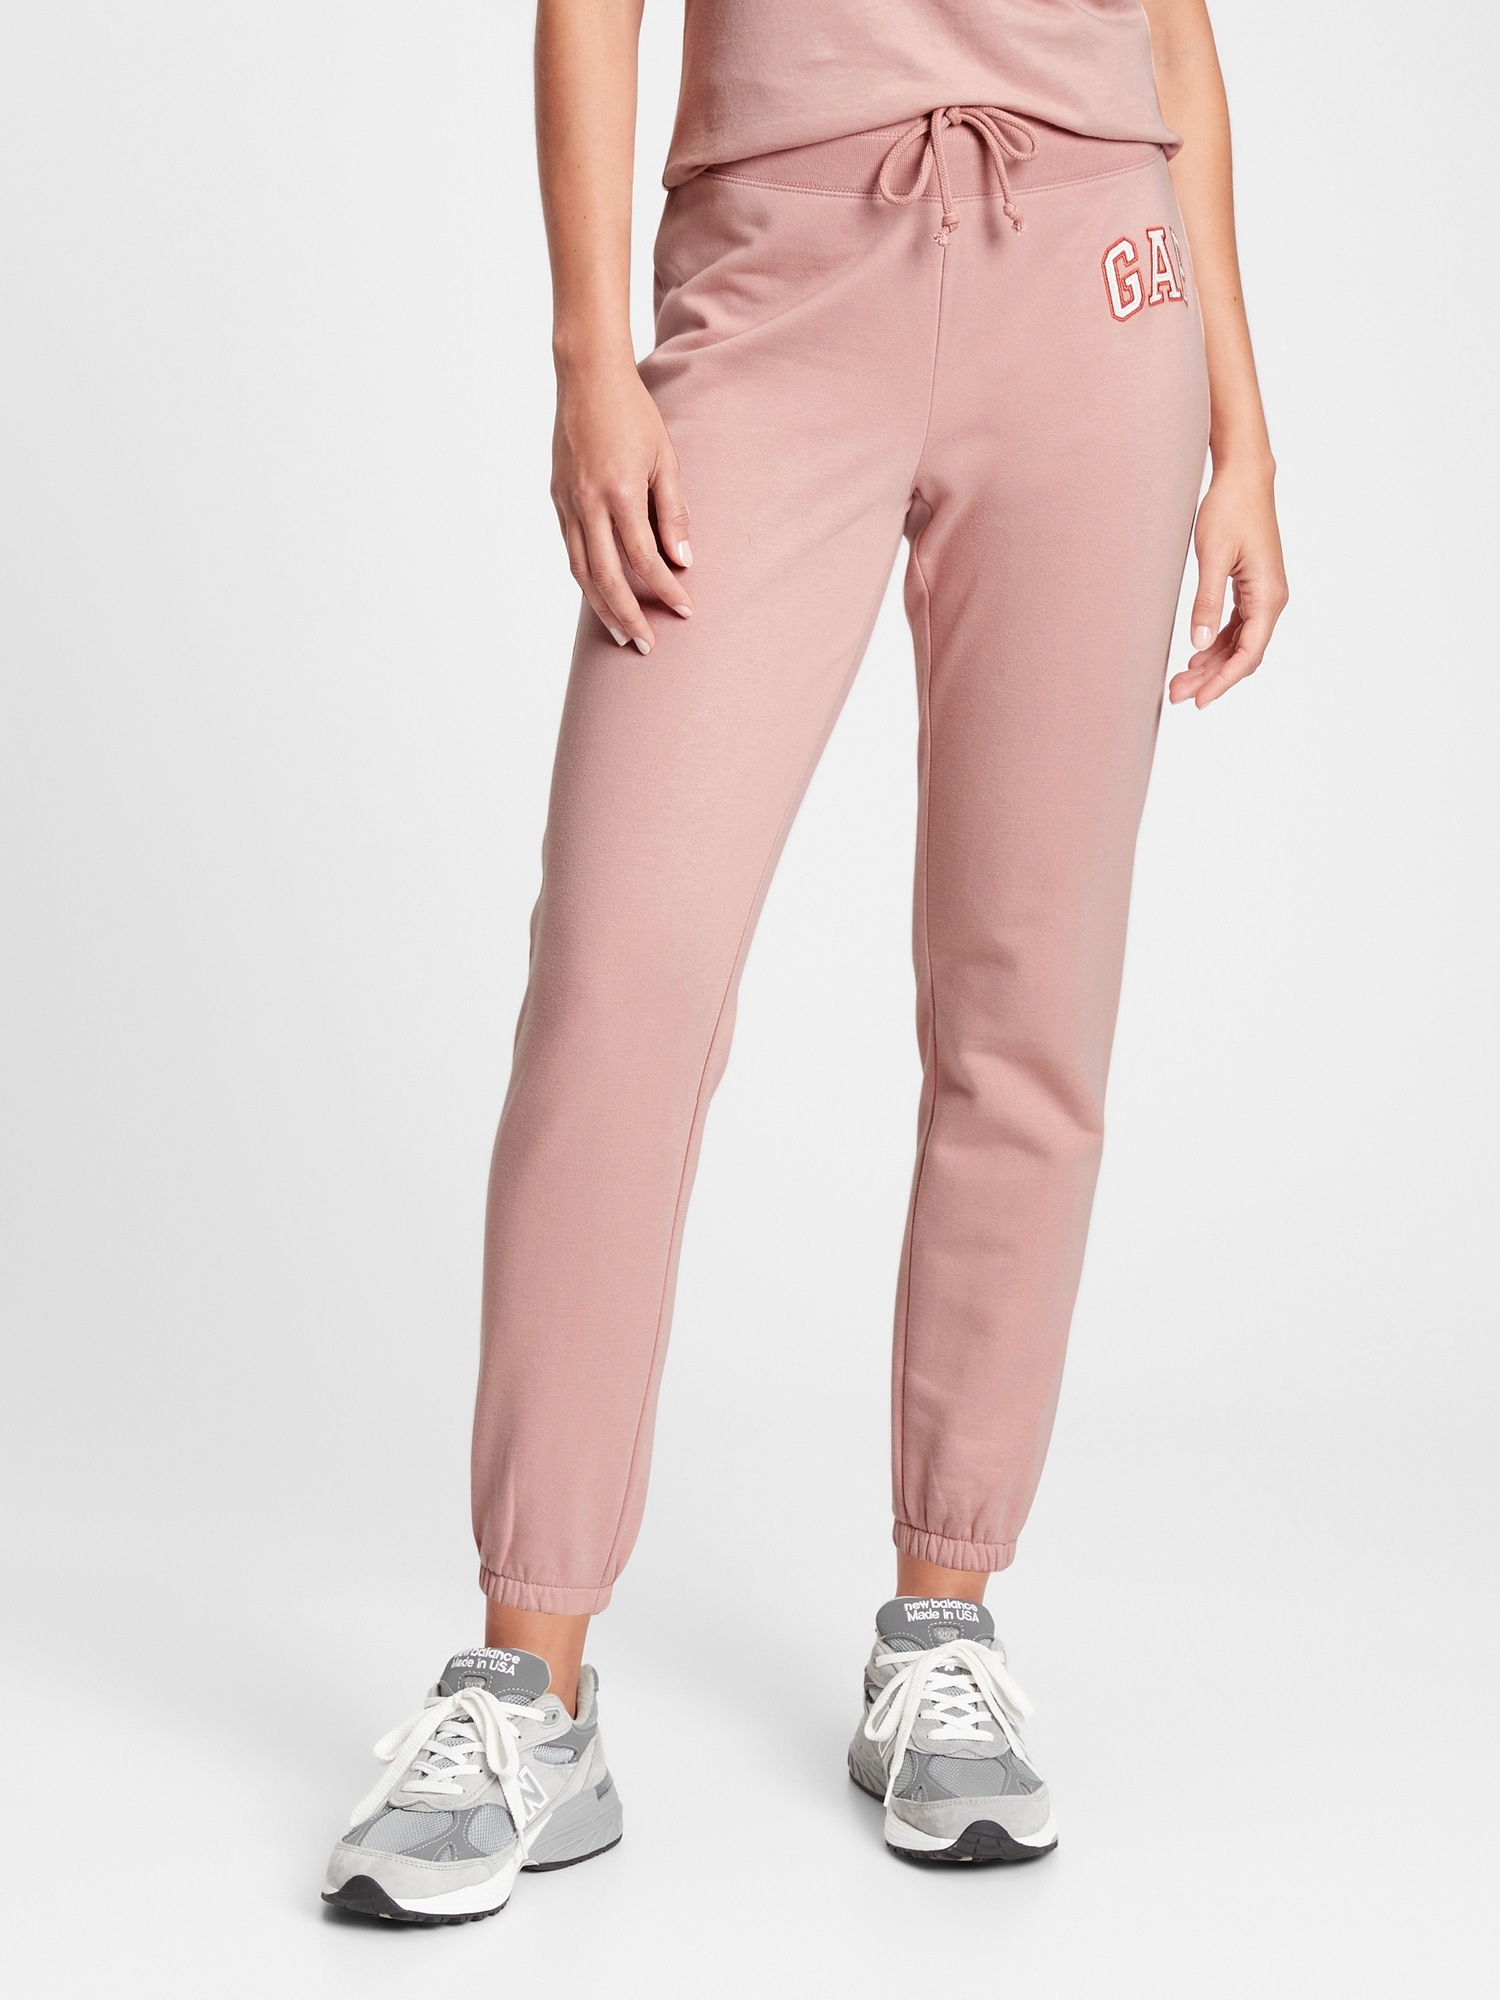 Buy GAP Tapered Fit Cuffed Track Pants at Redfynd